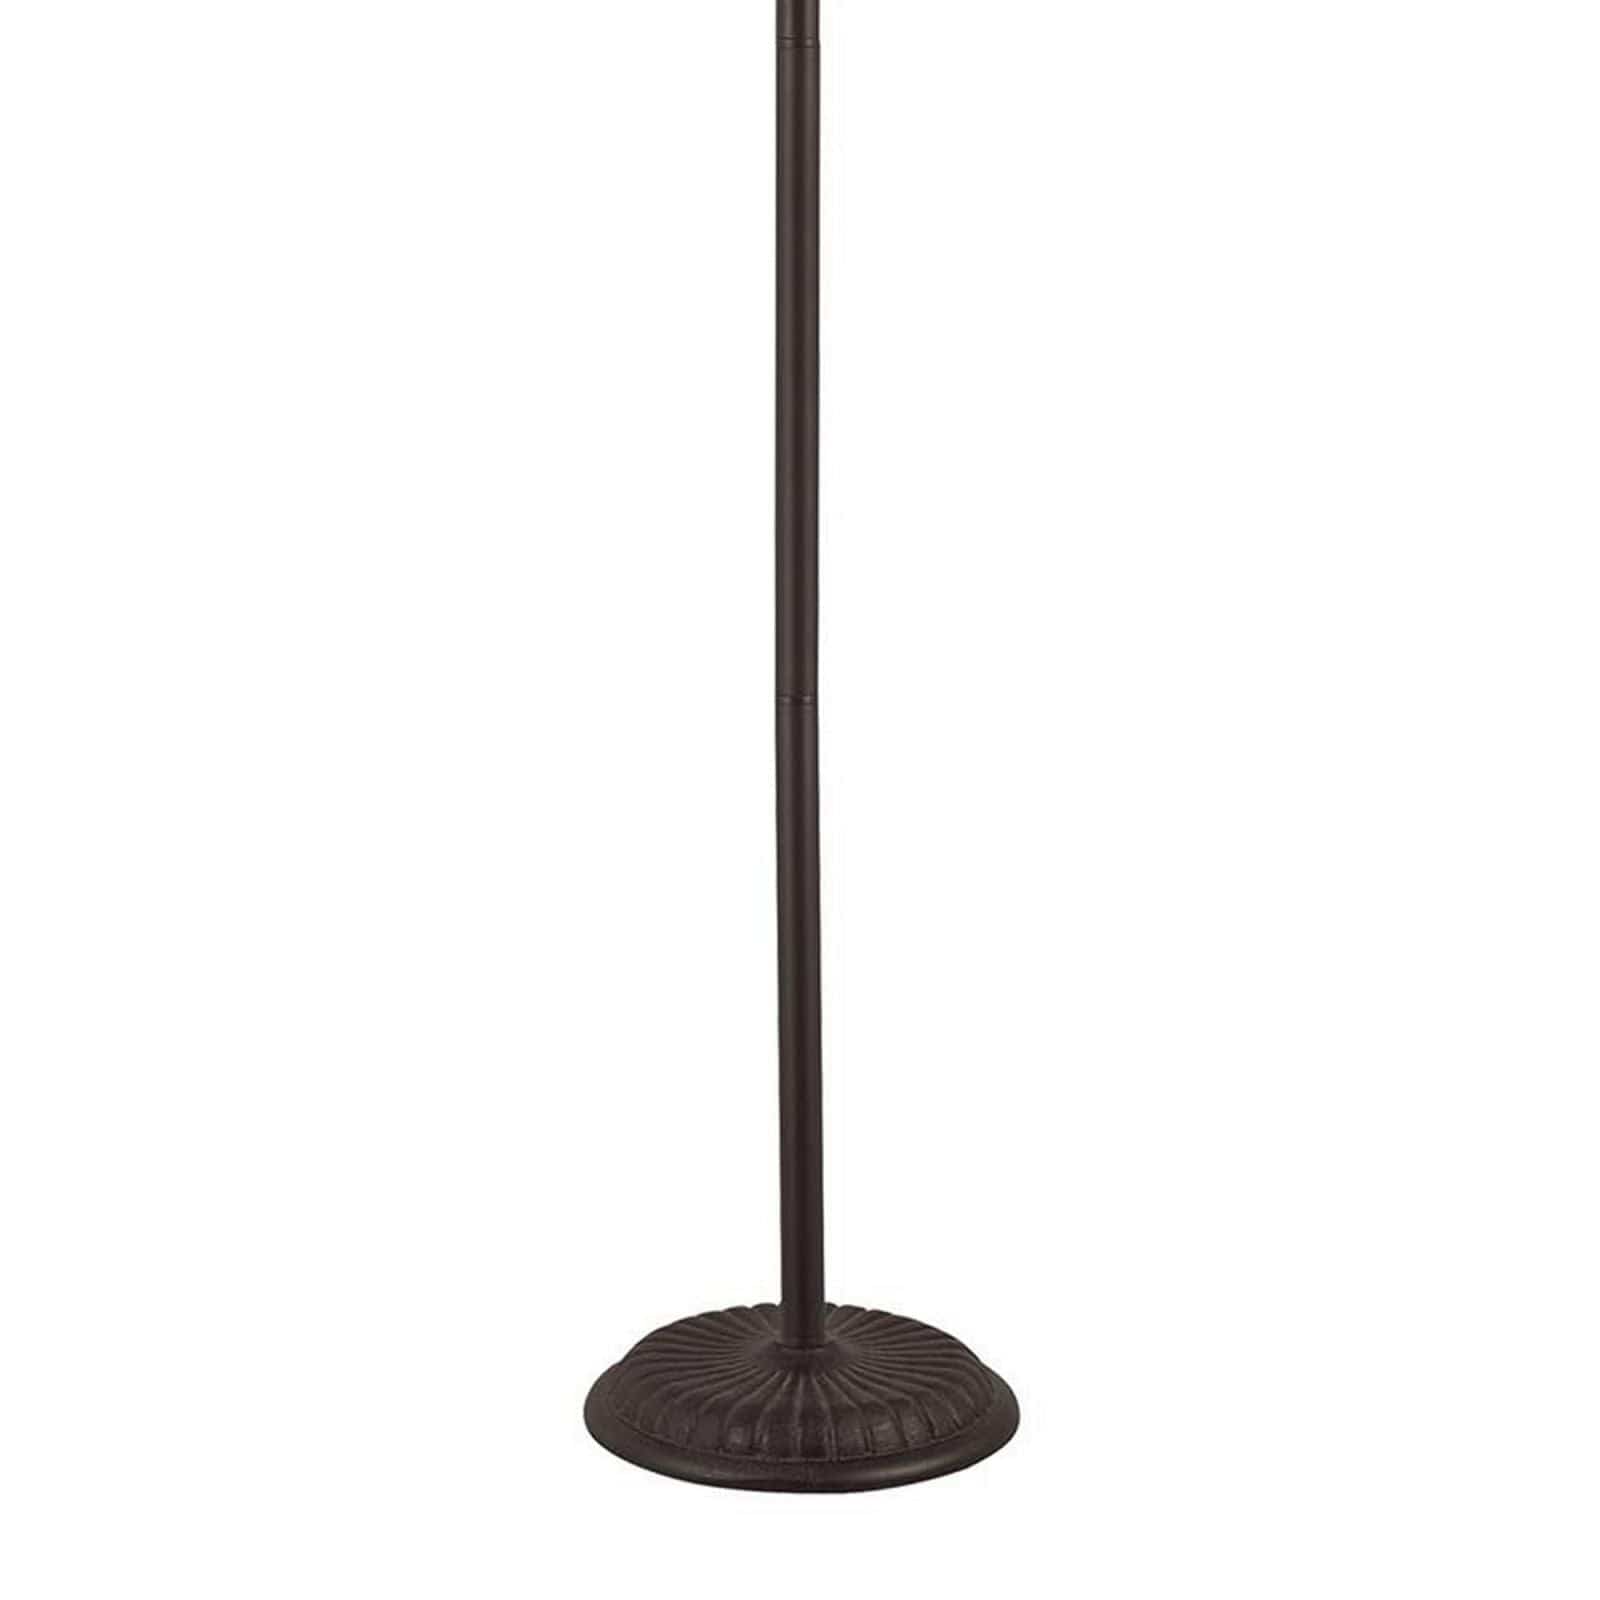 Benzara Metal Floor Lamp With Pull Chain Switch And Paper Shade, Off White And Black By Benzara Floor Lamps BM220649